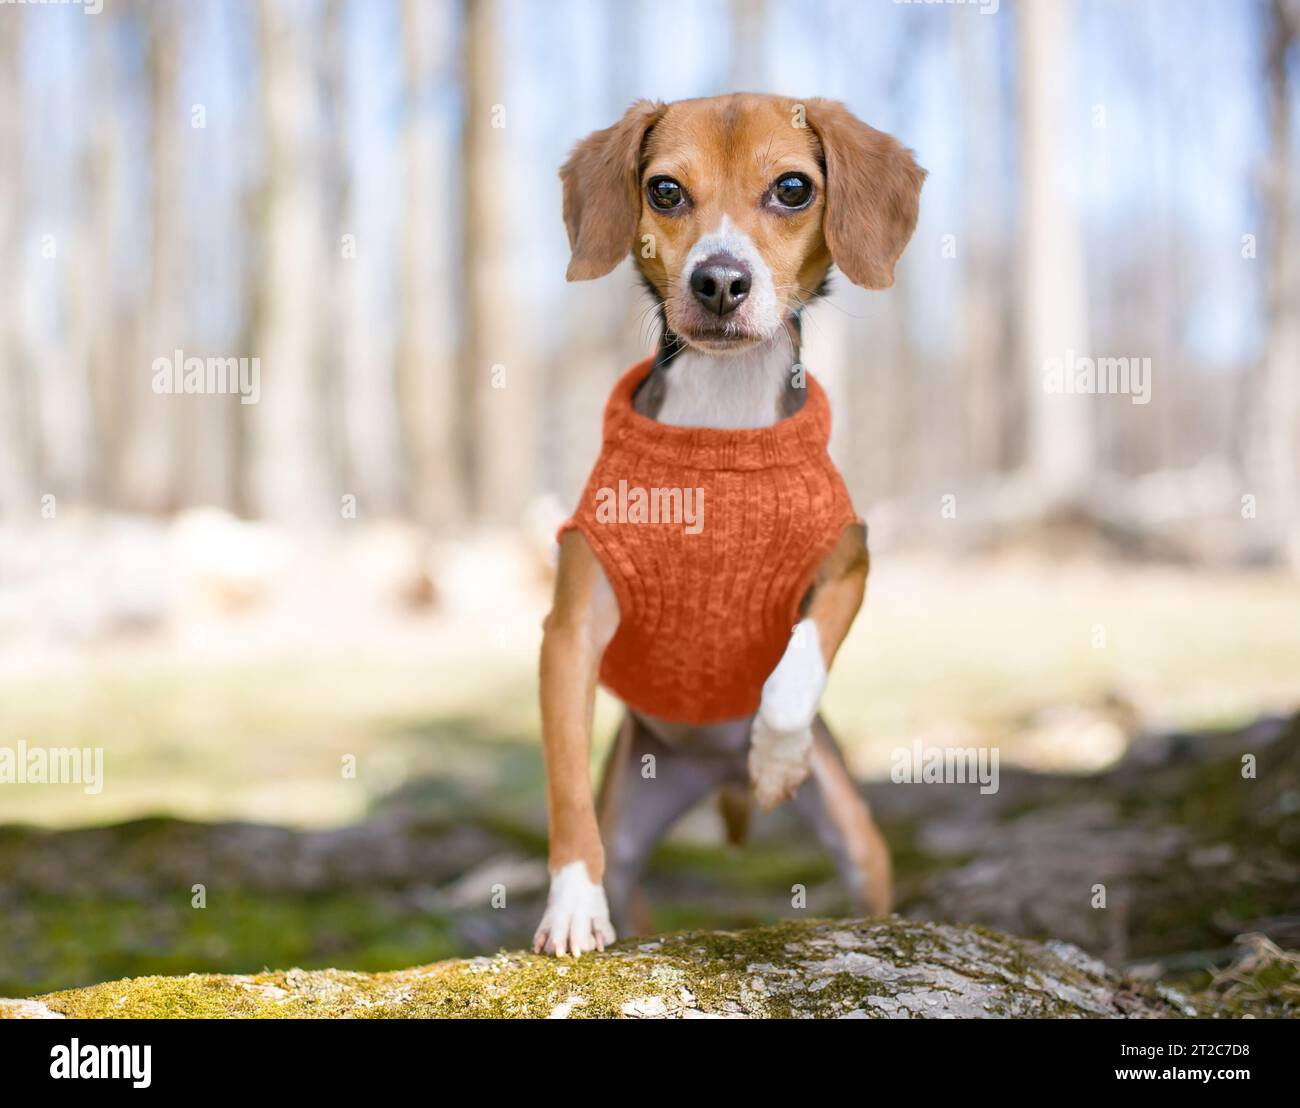 A cute Beagle mixed breed dog wearing a sweater outdoors Stock Photo